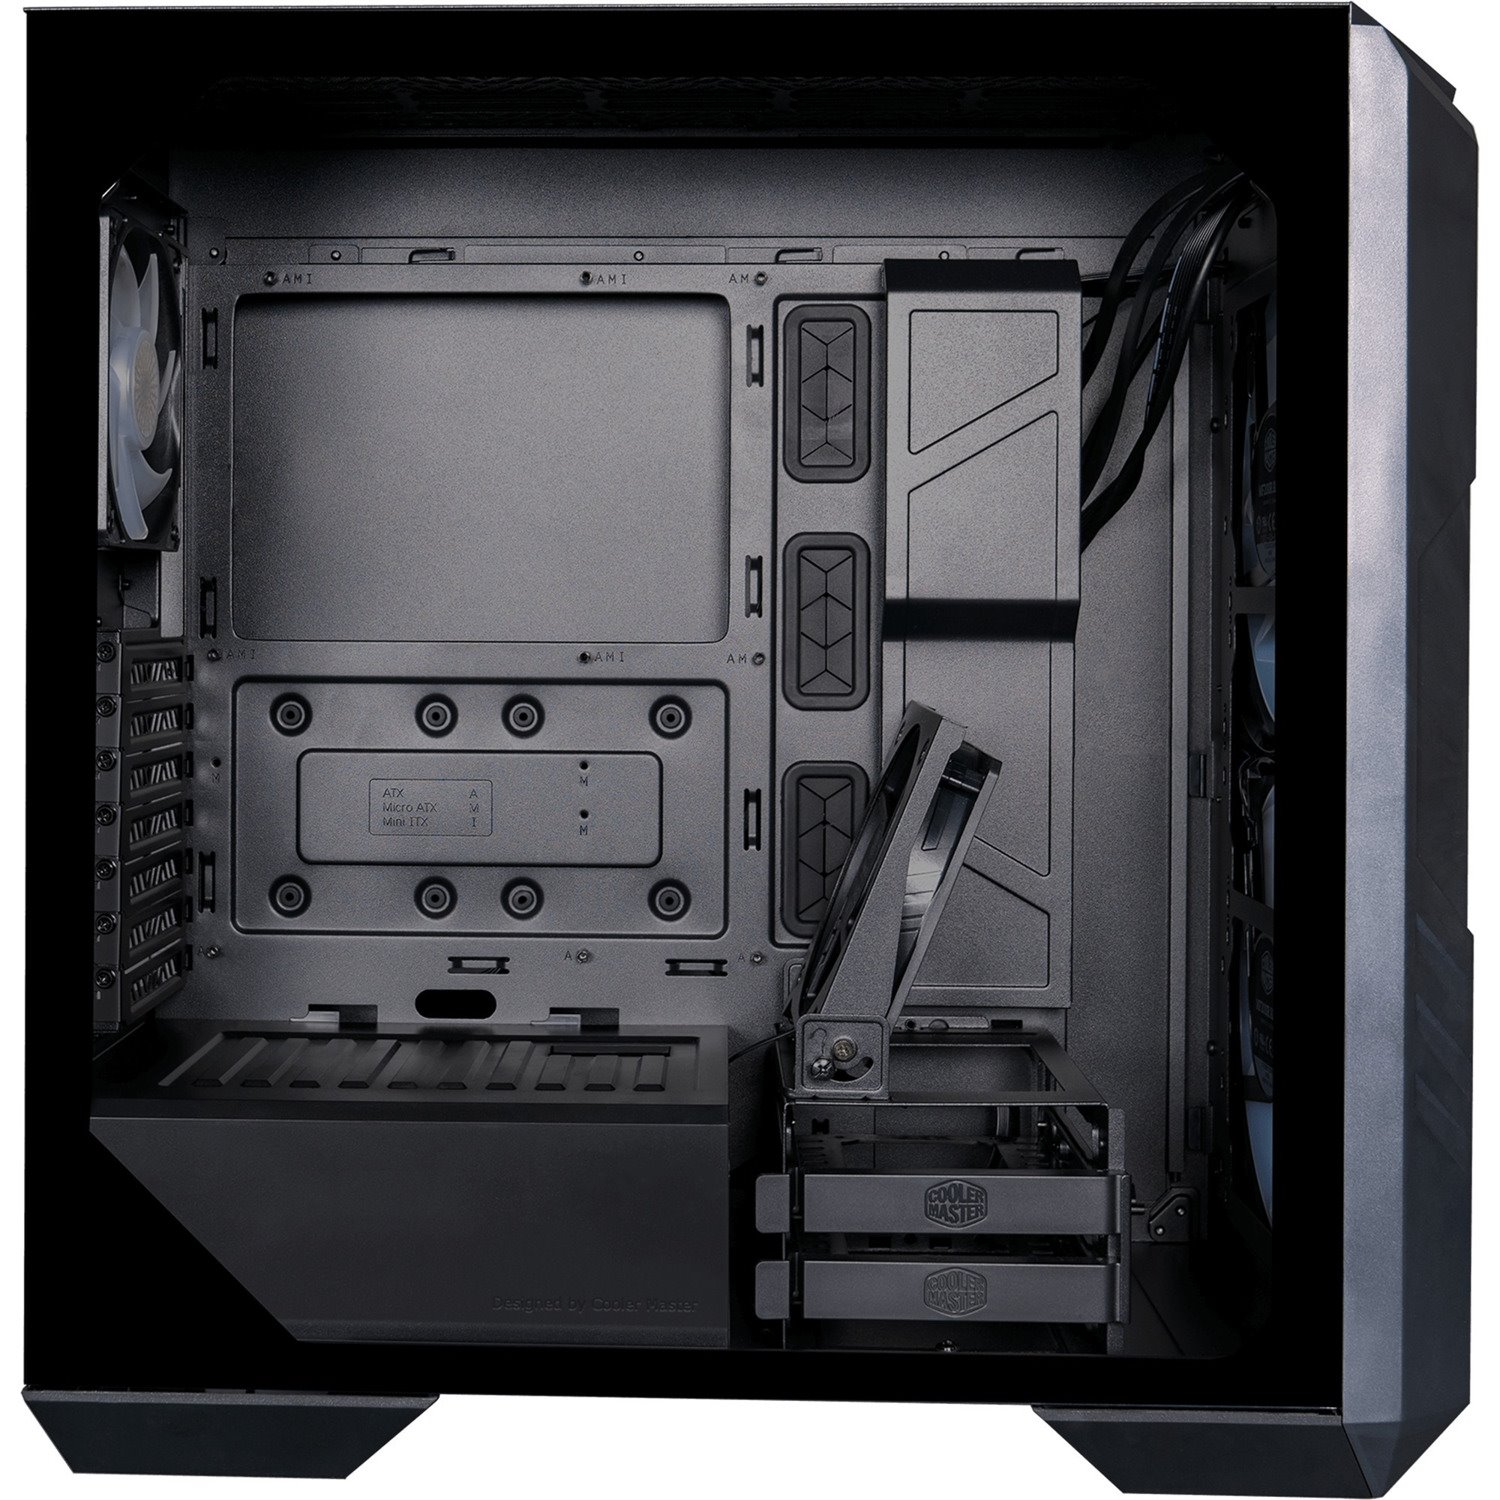 Cooler Master HAF Computer Case - ATX Motherboard Supported - Mid-tower - Steel, Mesh, Plastic, Tempered Glass - Black